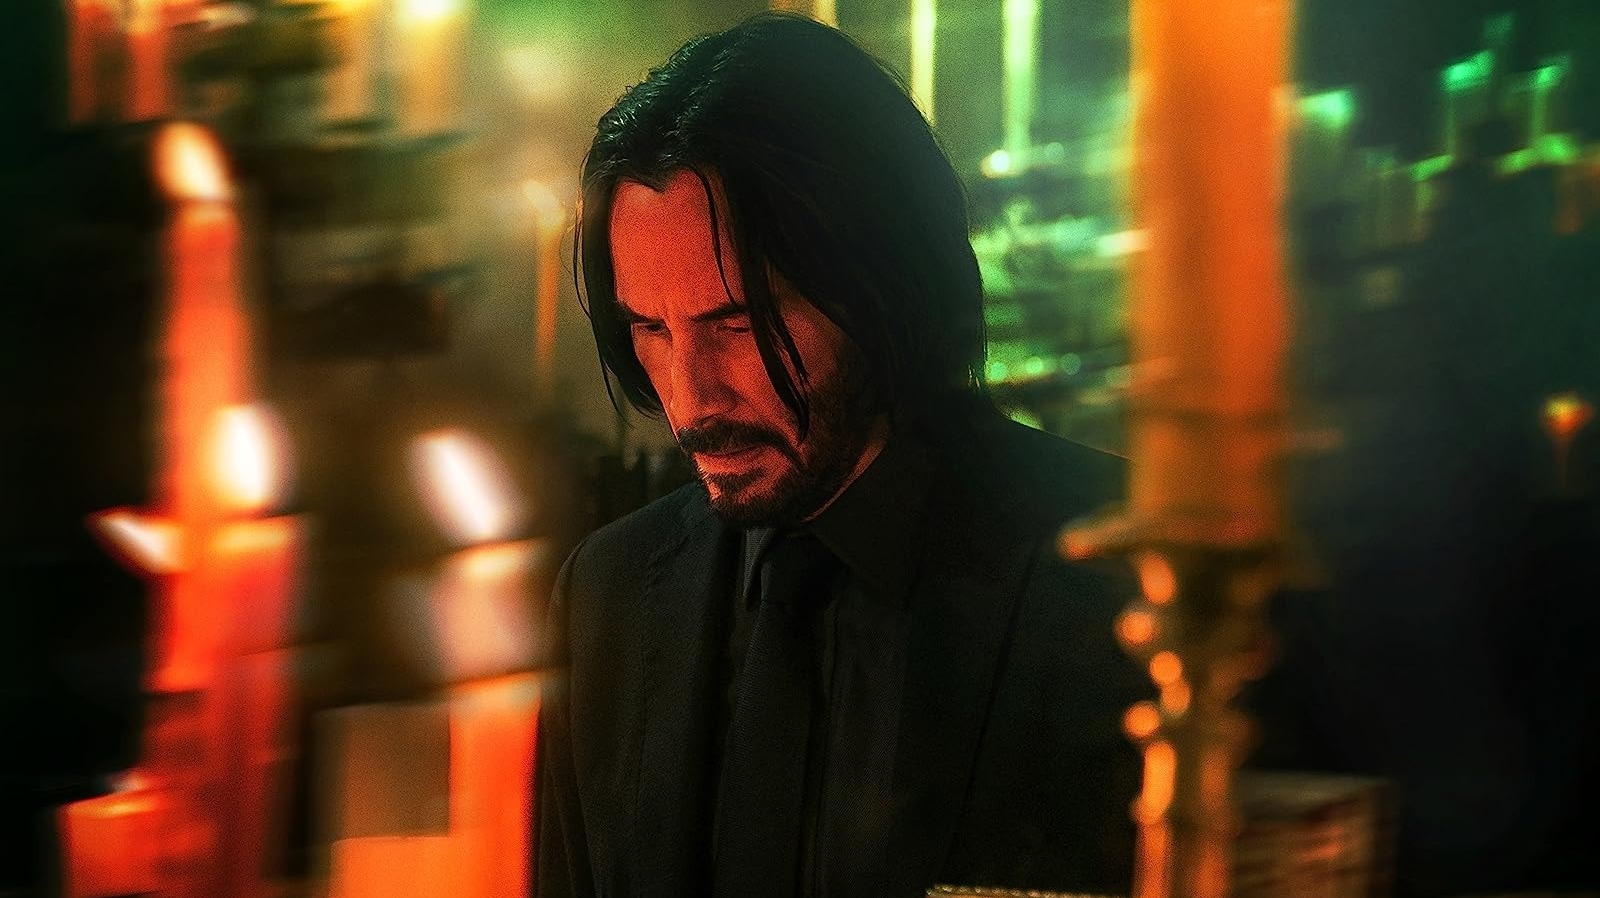 John Wick 4’s ending was inspired by a classic anime